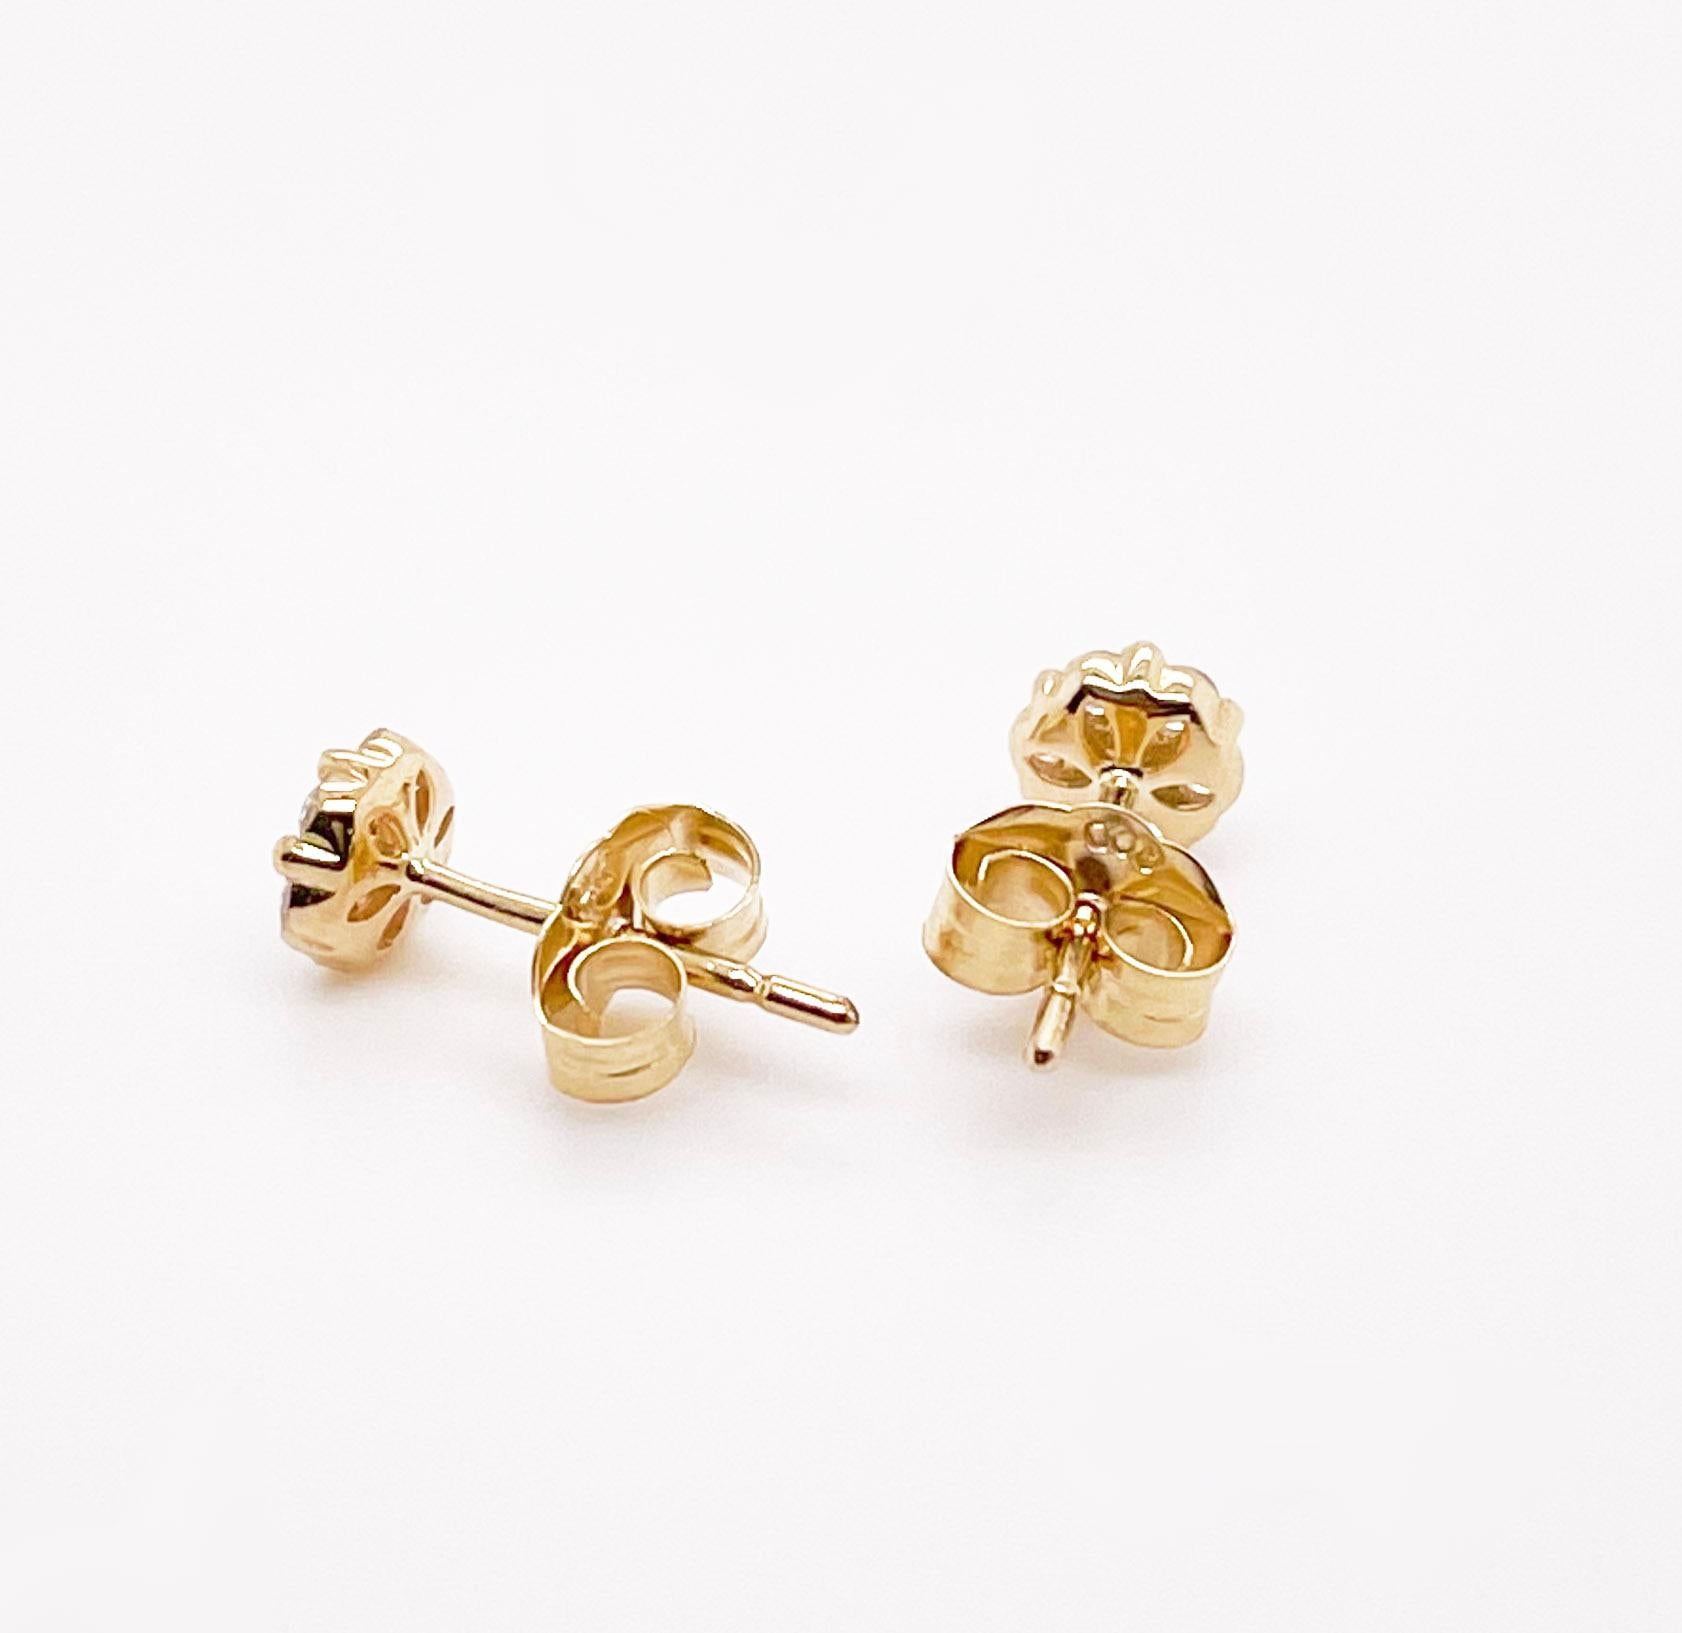 Round Cut Diamond Floral Cluster Studs, 4.5-5mm 14K Yellow Gold 1/4 Carat Total  For Sale